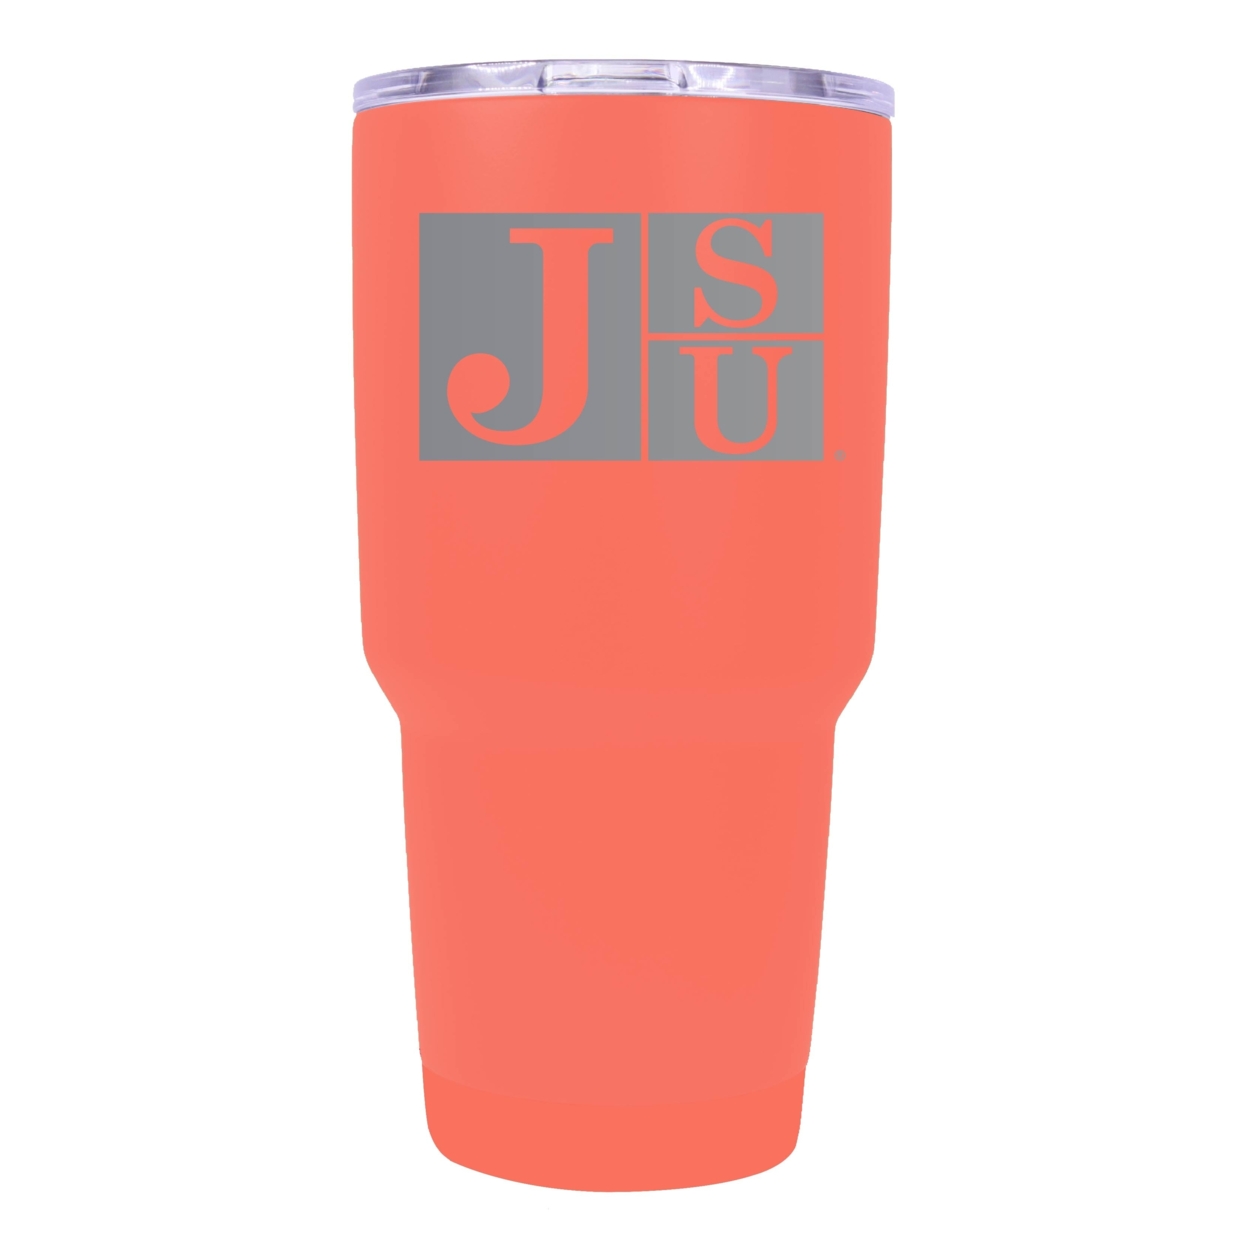 Jackson State University 24 Oz Laser Engraved Stainless Steel Insulated Tumbler - Choose Your Color. - Coral